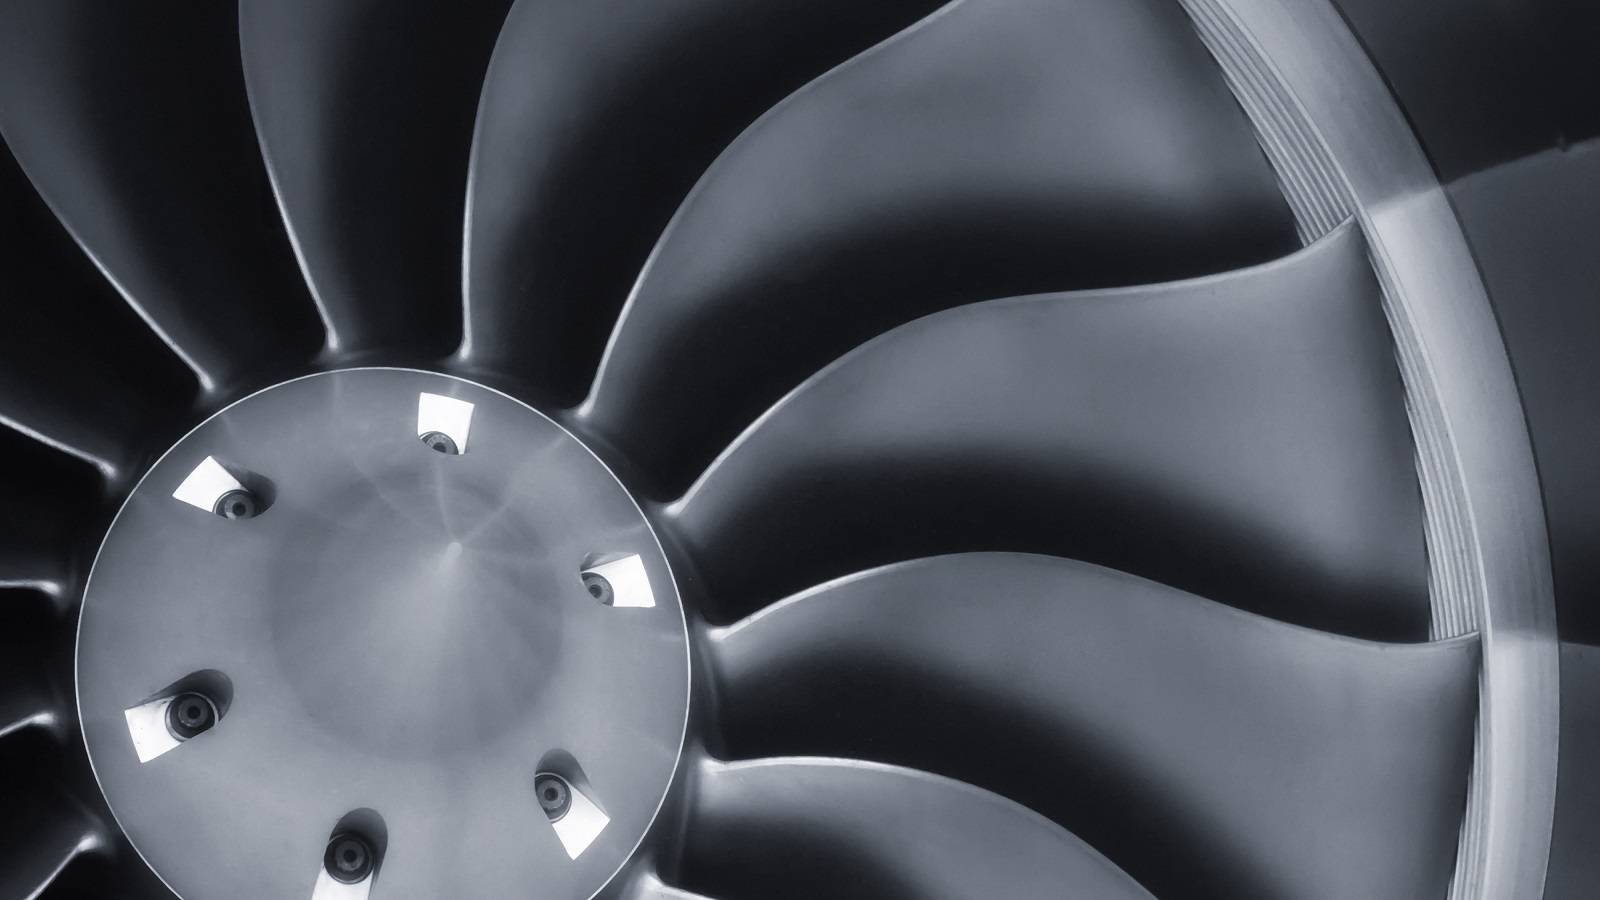 HPC4EI-Raytheon: Reducing fuel use in aircraft engines